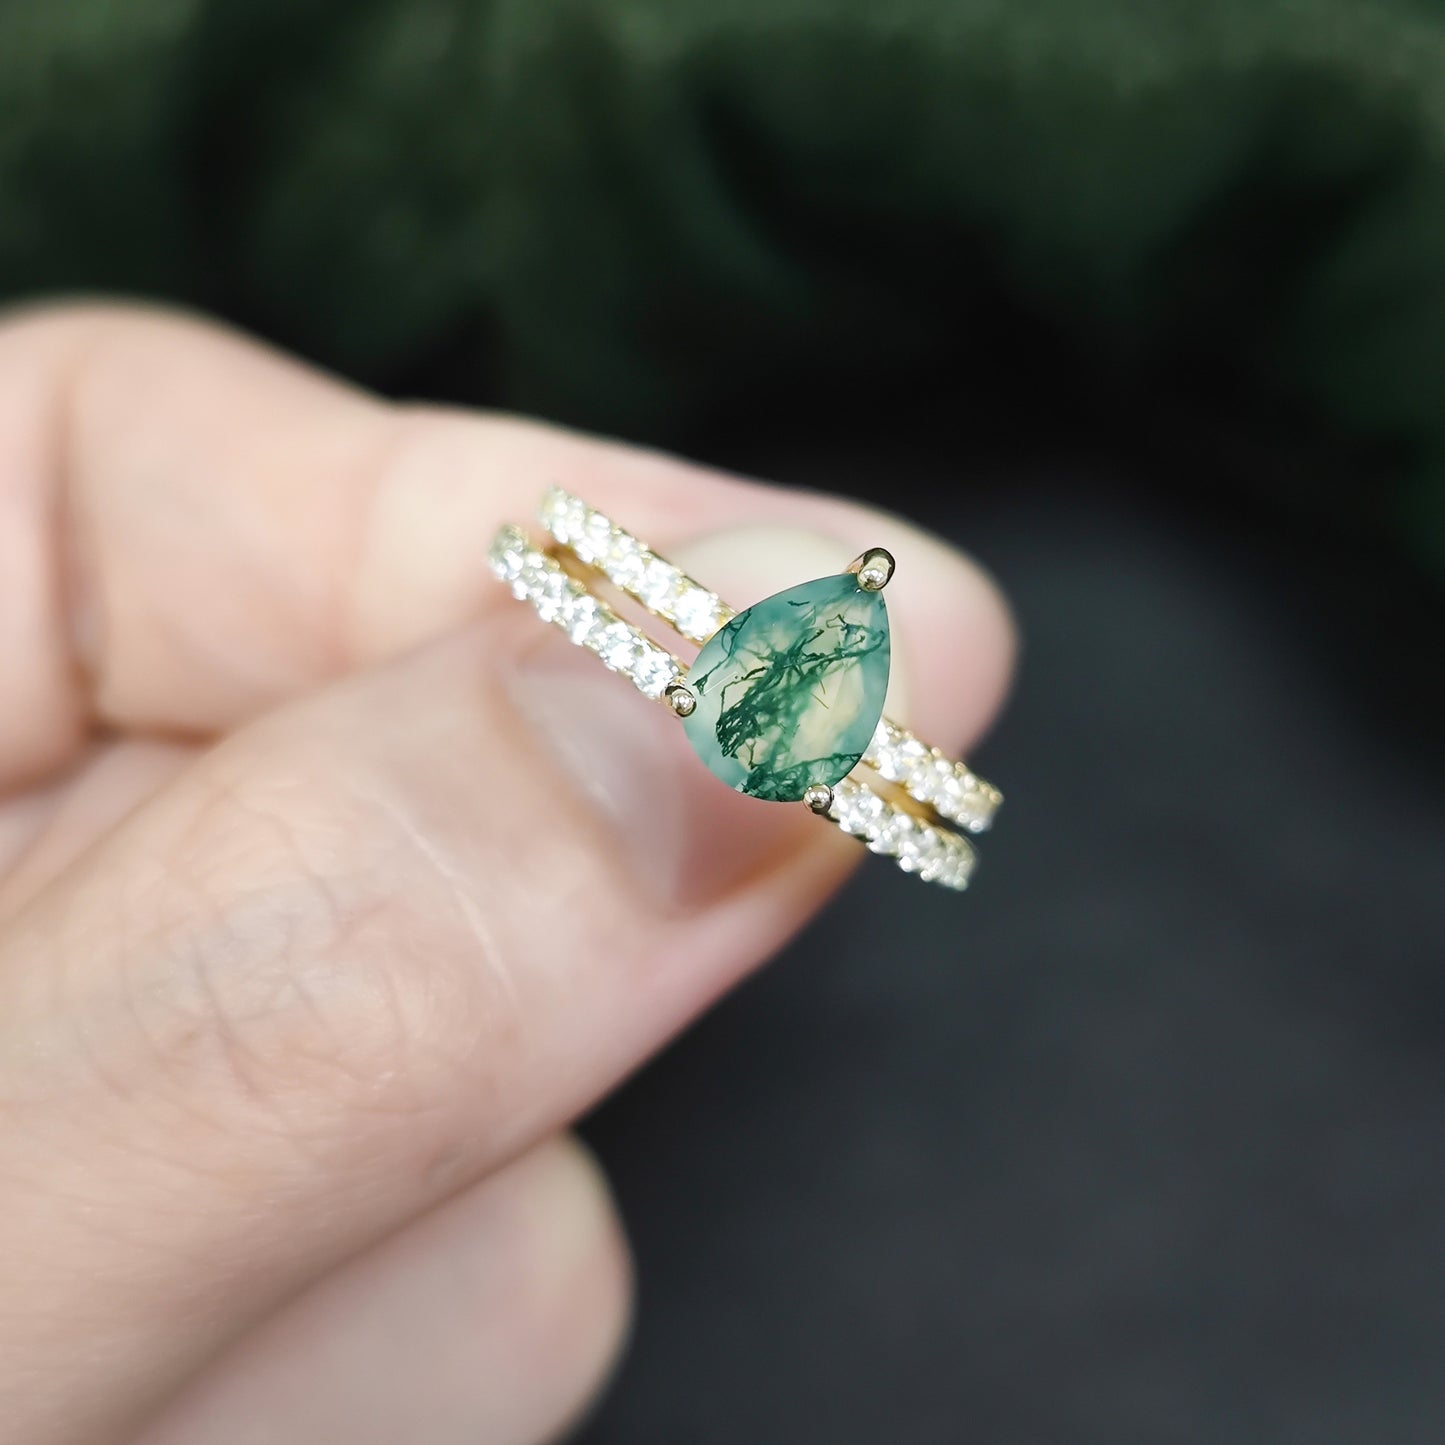 Pear Shaped Moss Agate Engagement Classic Solitaire Ring Set 2pcs